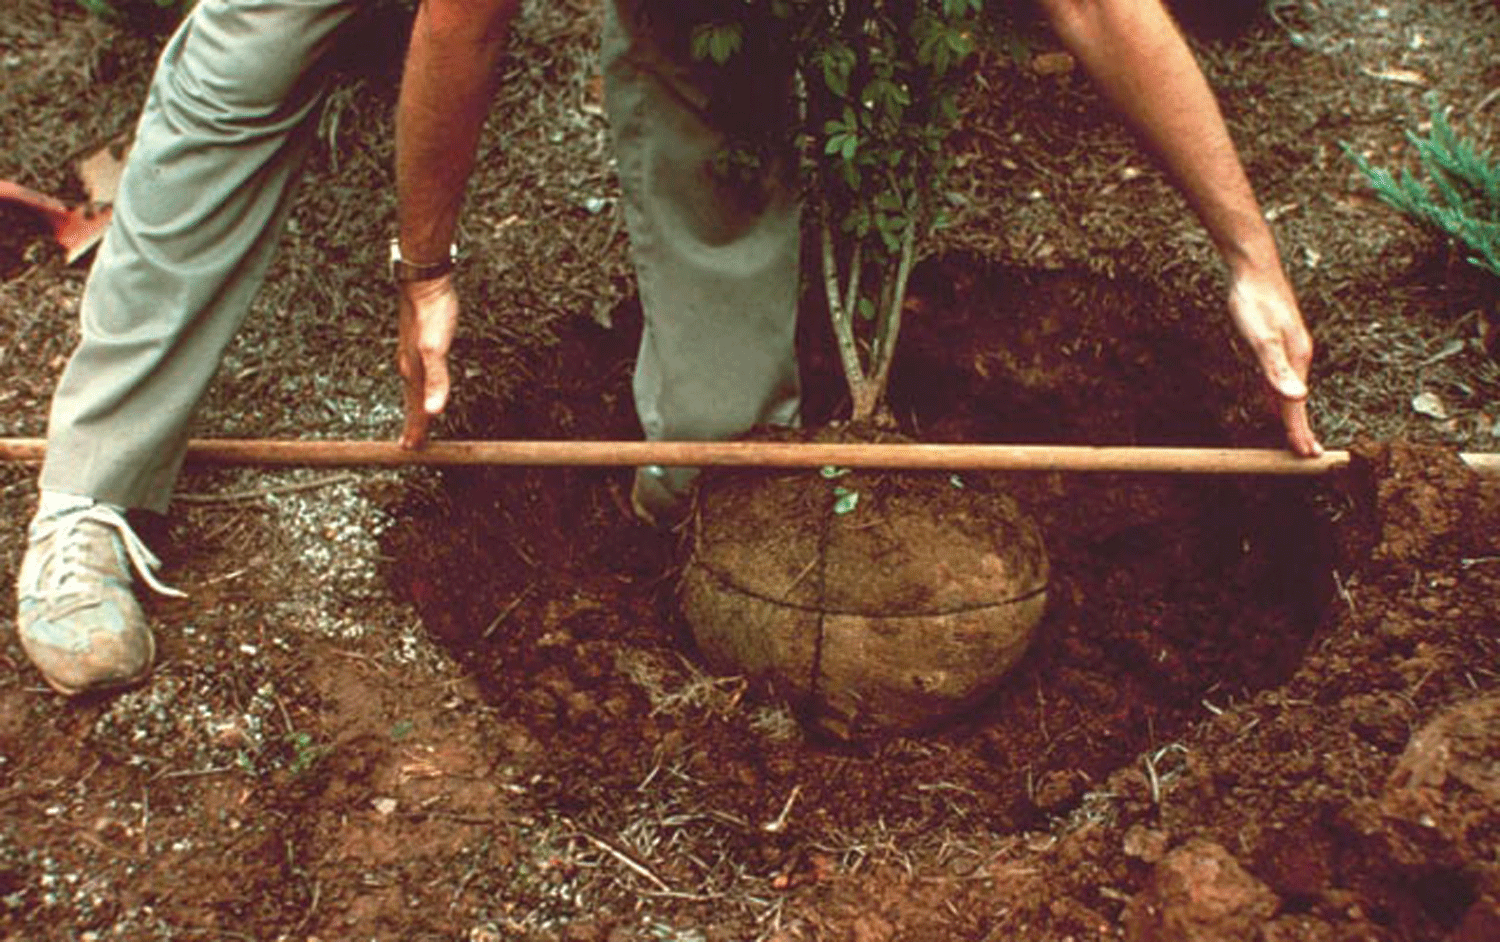 Figure 3. Dig the planting hole two times wider than the root ball. Make certain the top of the root ball is level with the soil surface.